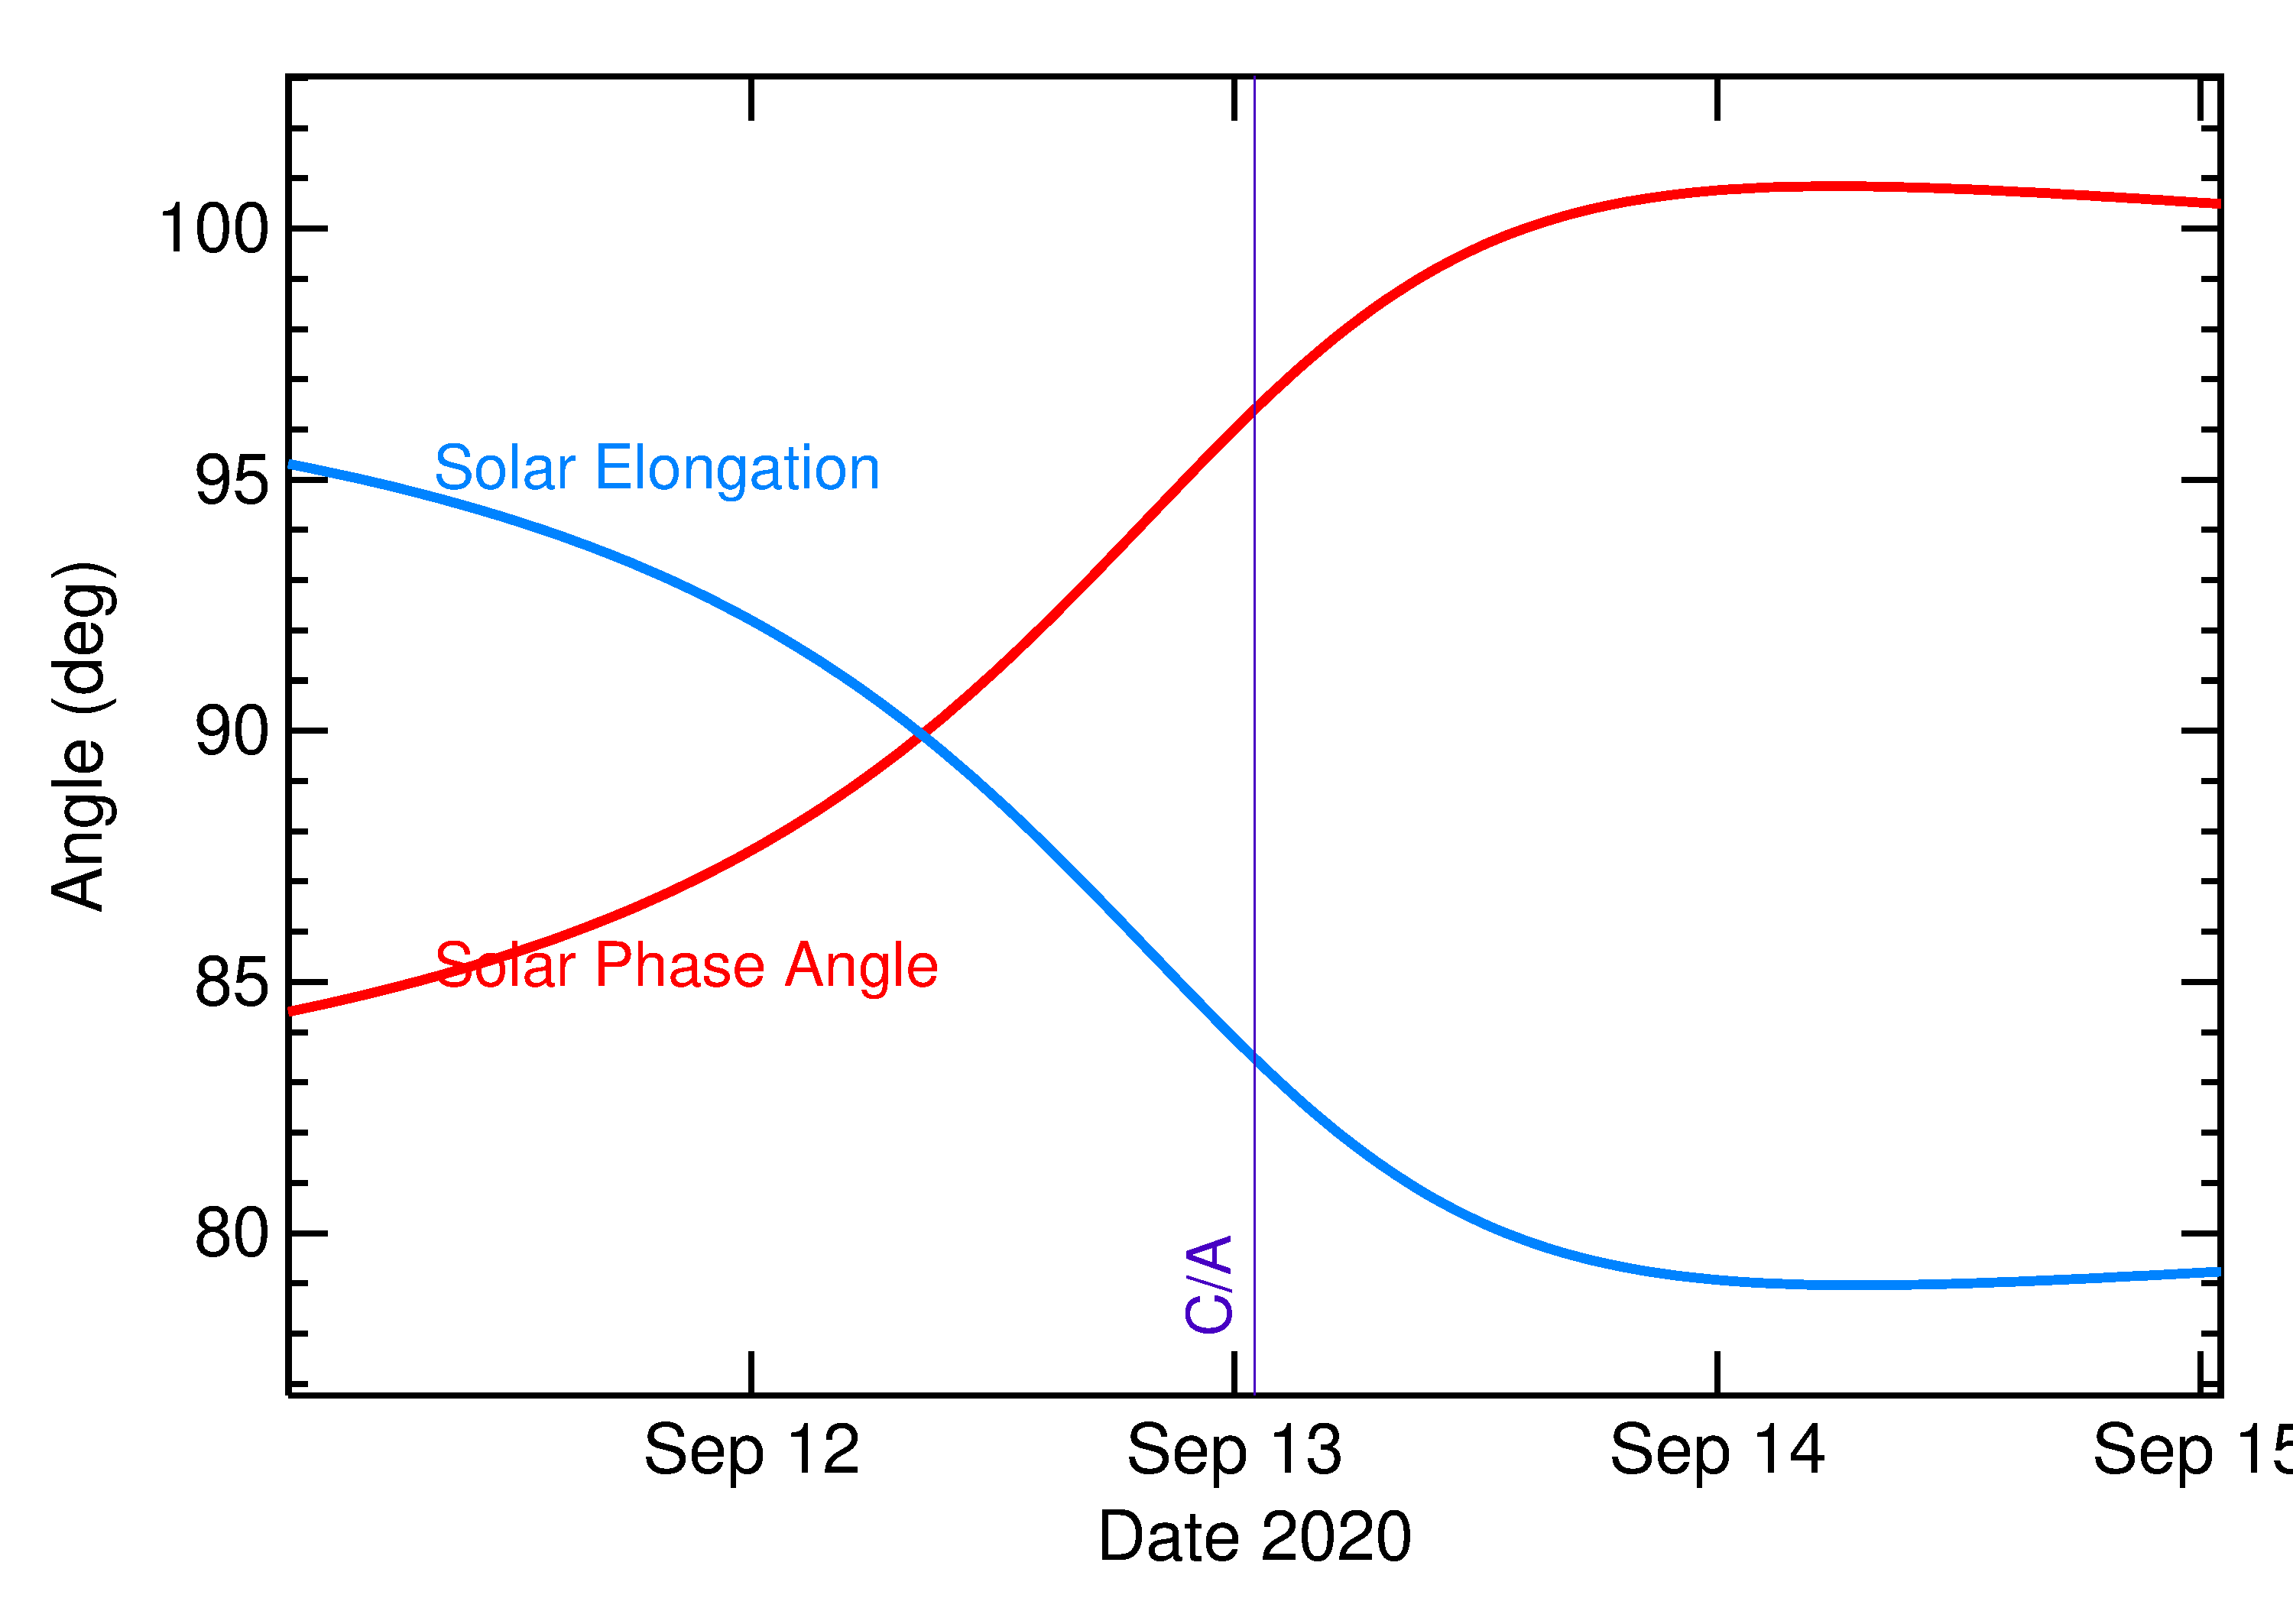 Solar Elongation and Solar Phase Angle of 2020 SP in the days around closest approach